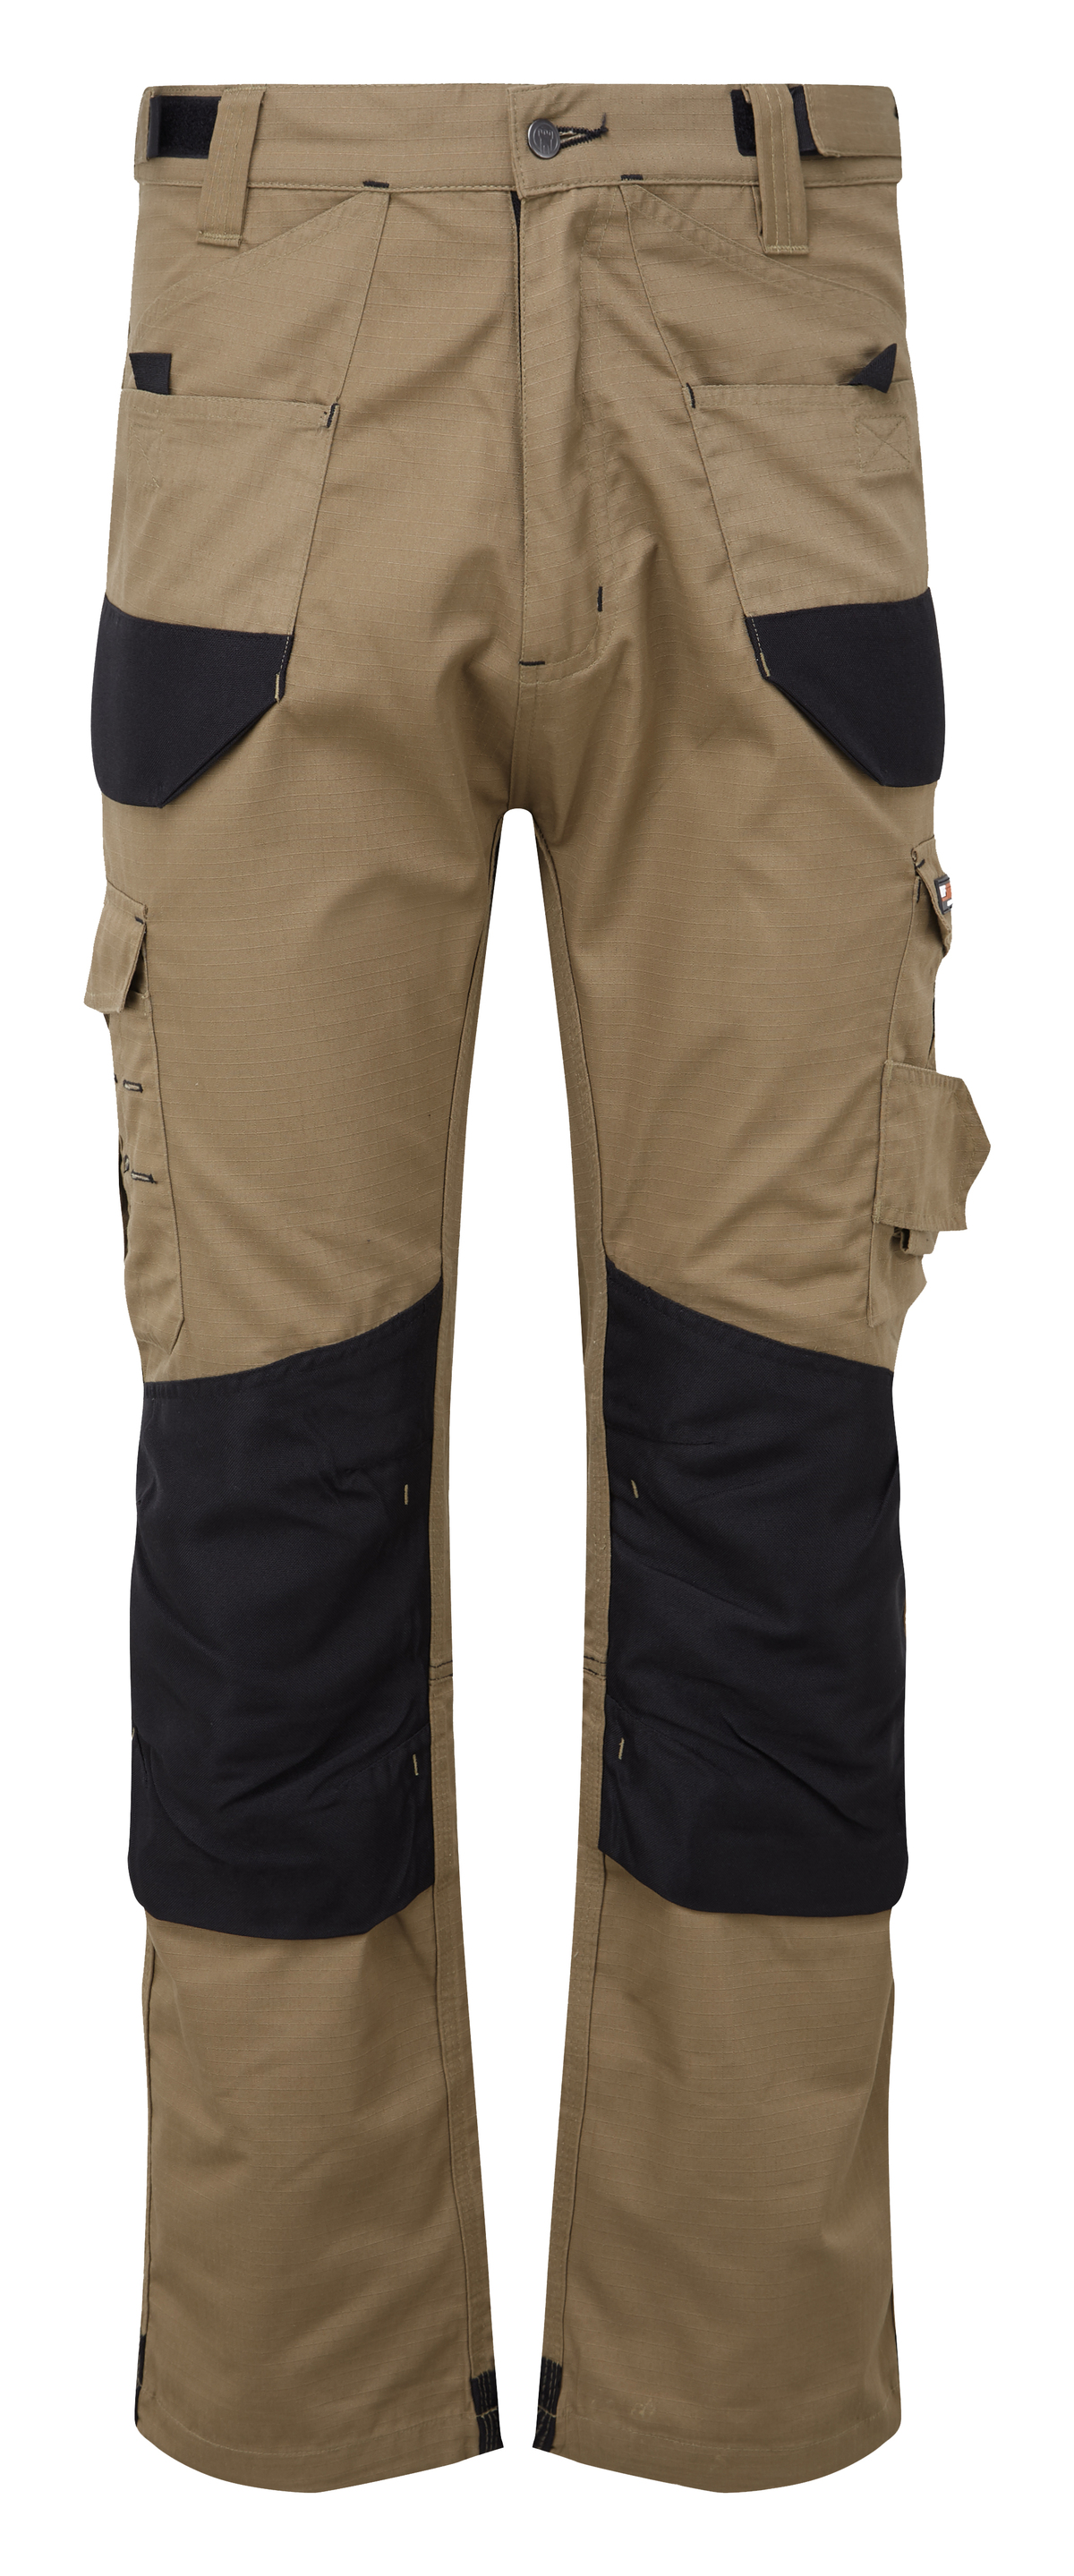 Tuffstuff 711 Pro Work Trouser  Nater PPE Work and Leisurewear  Derby  Workwear and HiVis Suppliers